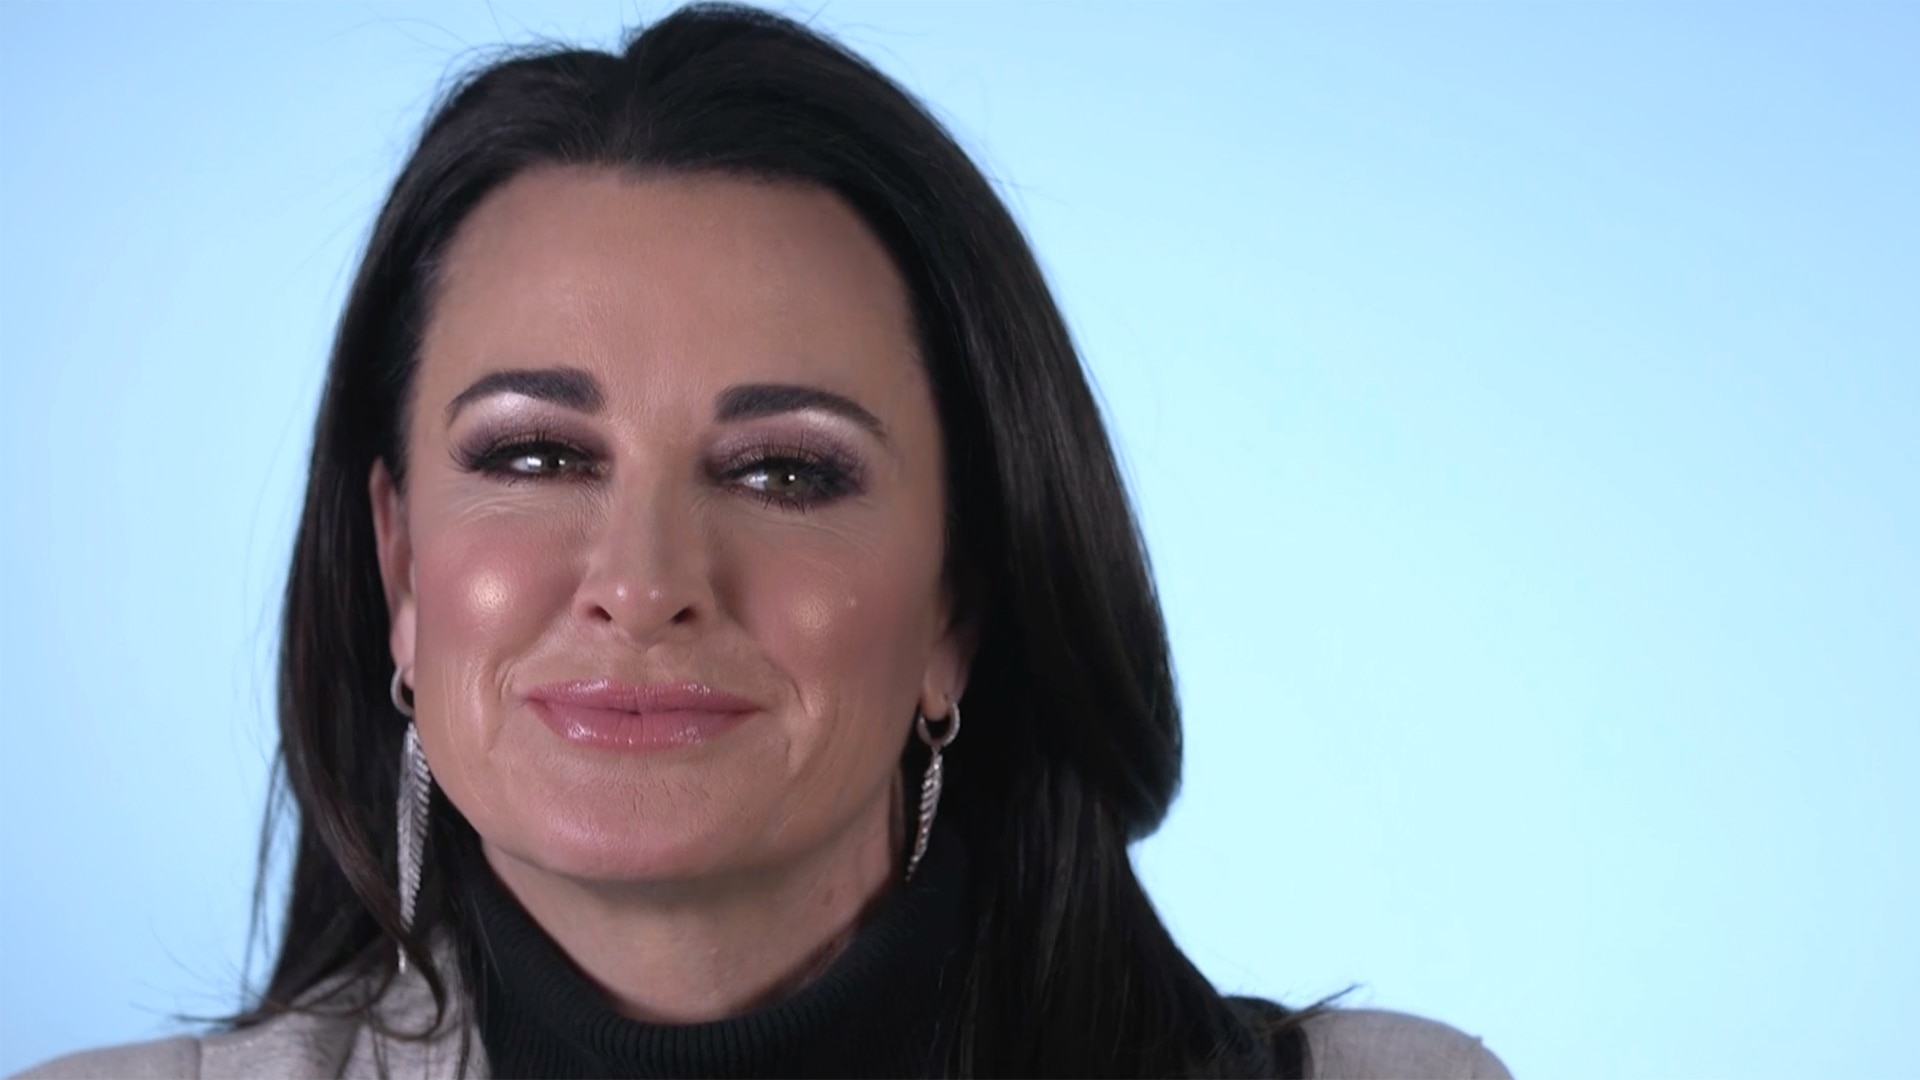 Kyle Richards teases Housewives of North Pole sequel with RHOBH cameos   Metro News